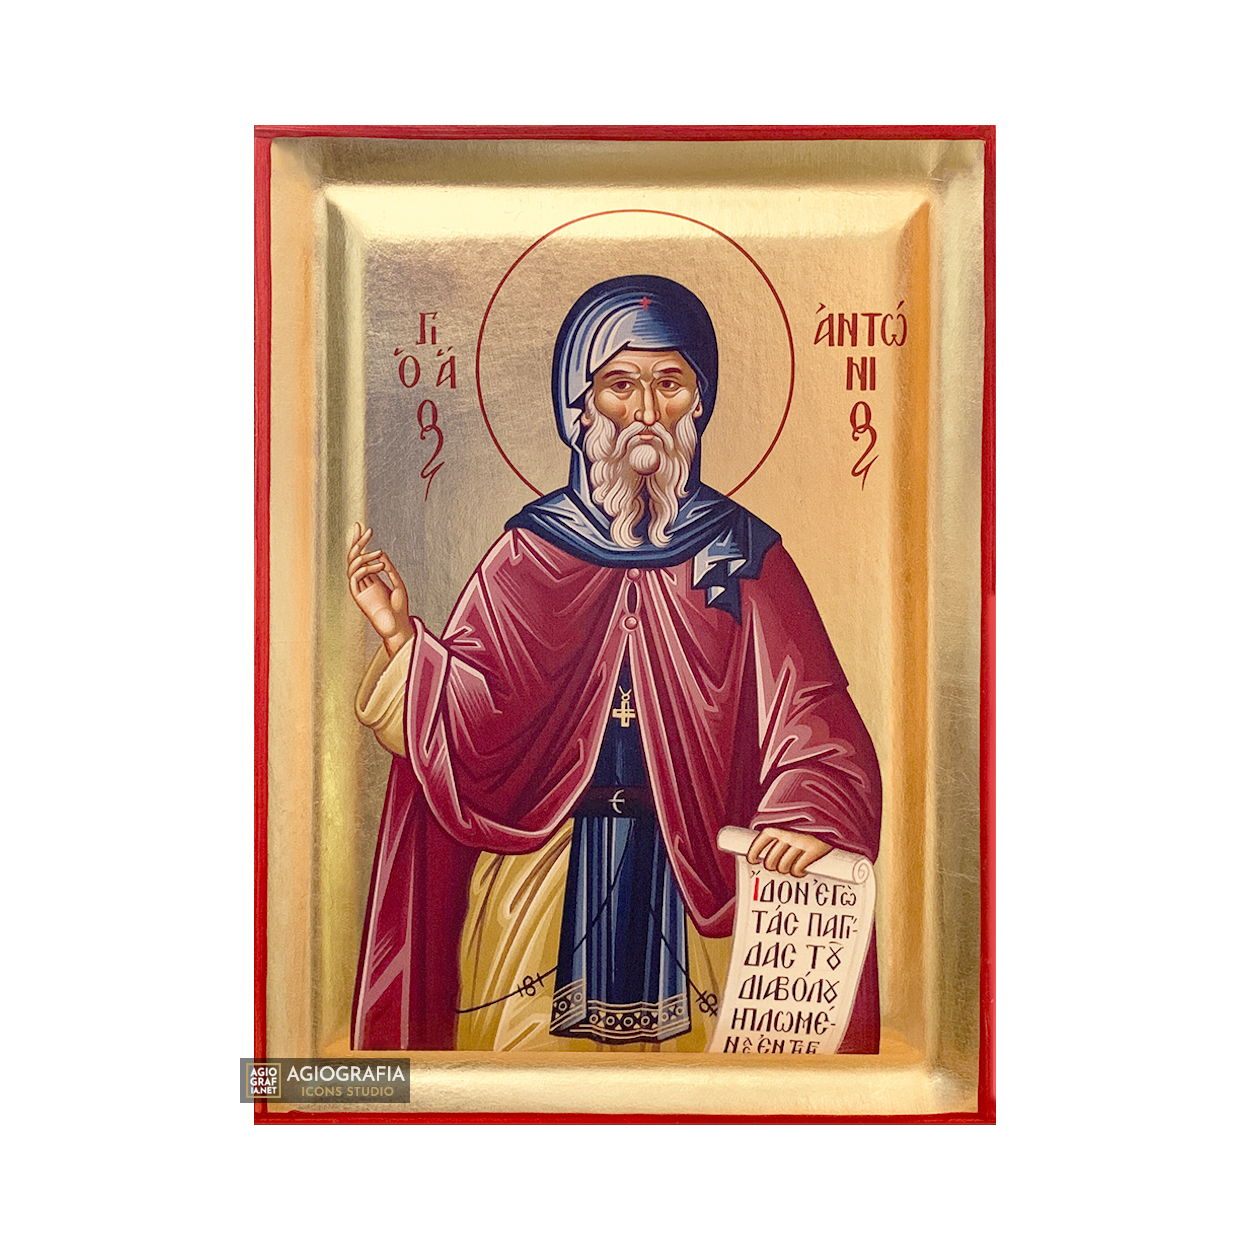 St Anthony Christian Orthodox Icon on Wood with Gold Leaf